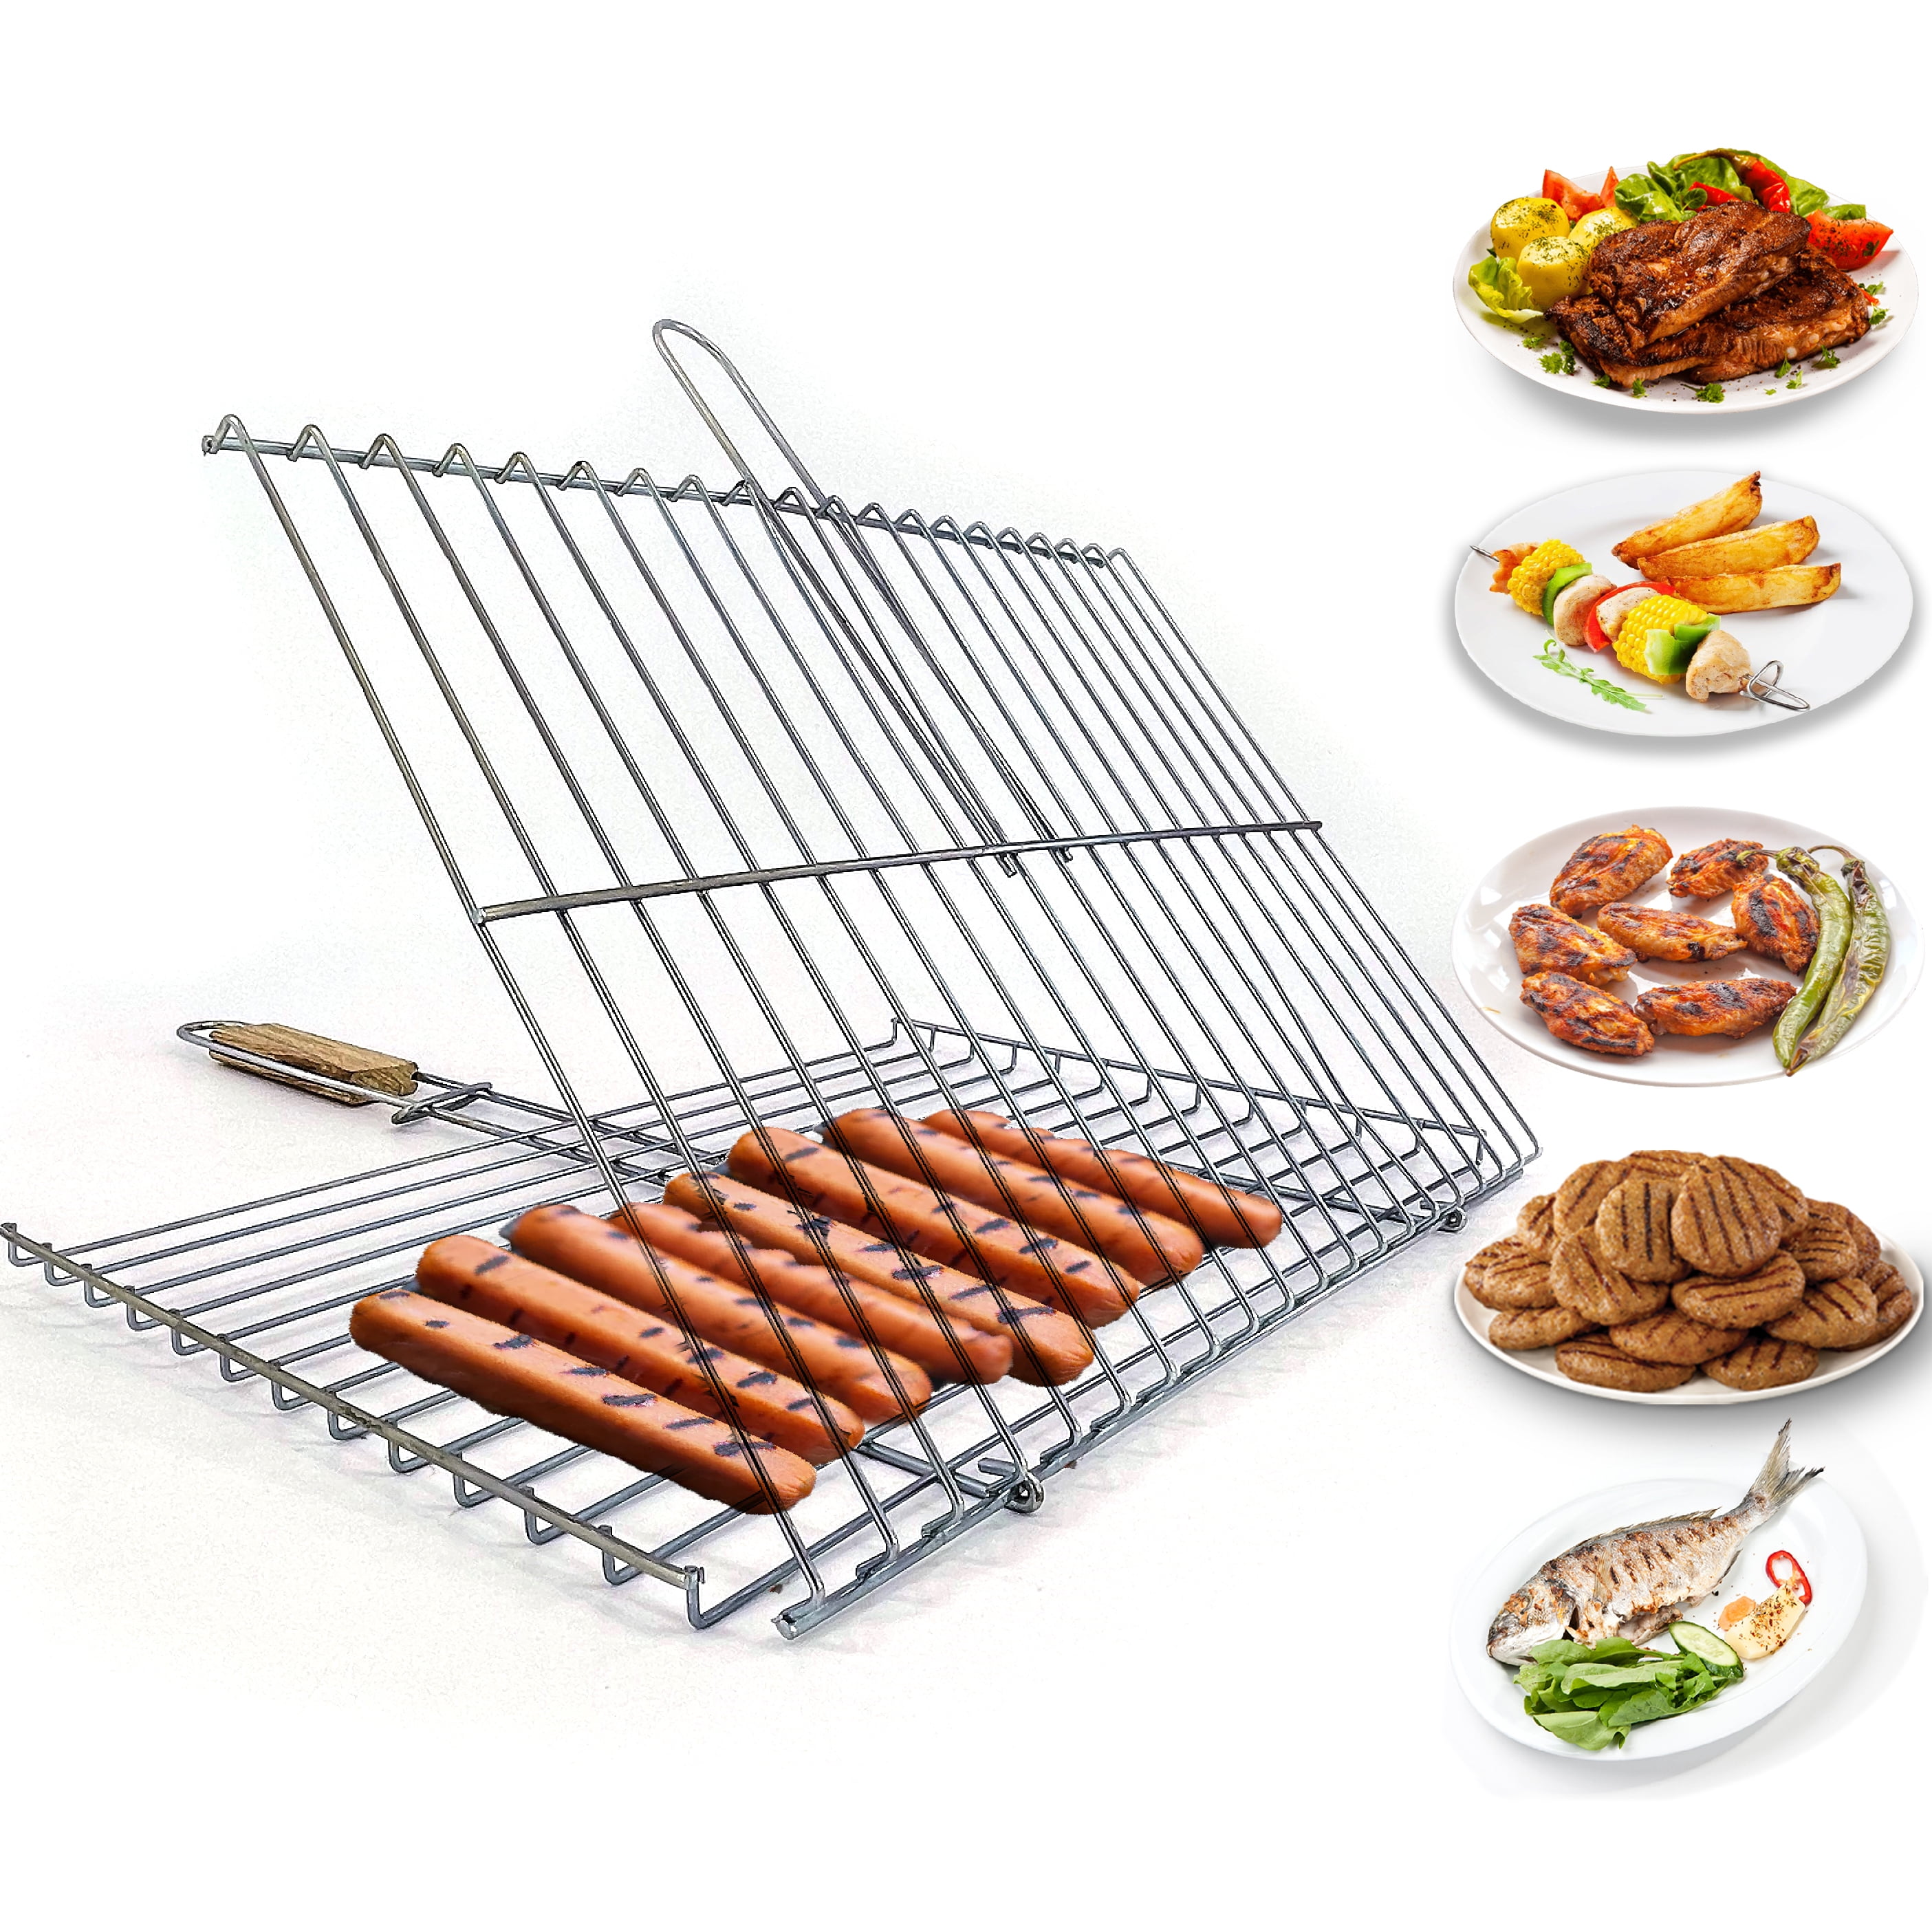 Stainless Steel Wooden Handle BBQ Sausage Grilling Basket Grill Durable Rack